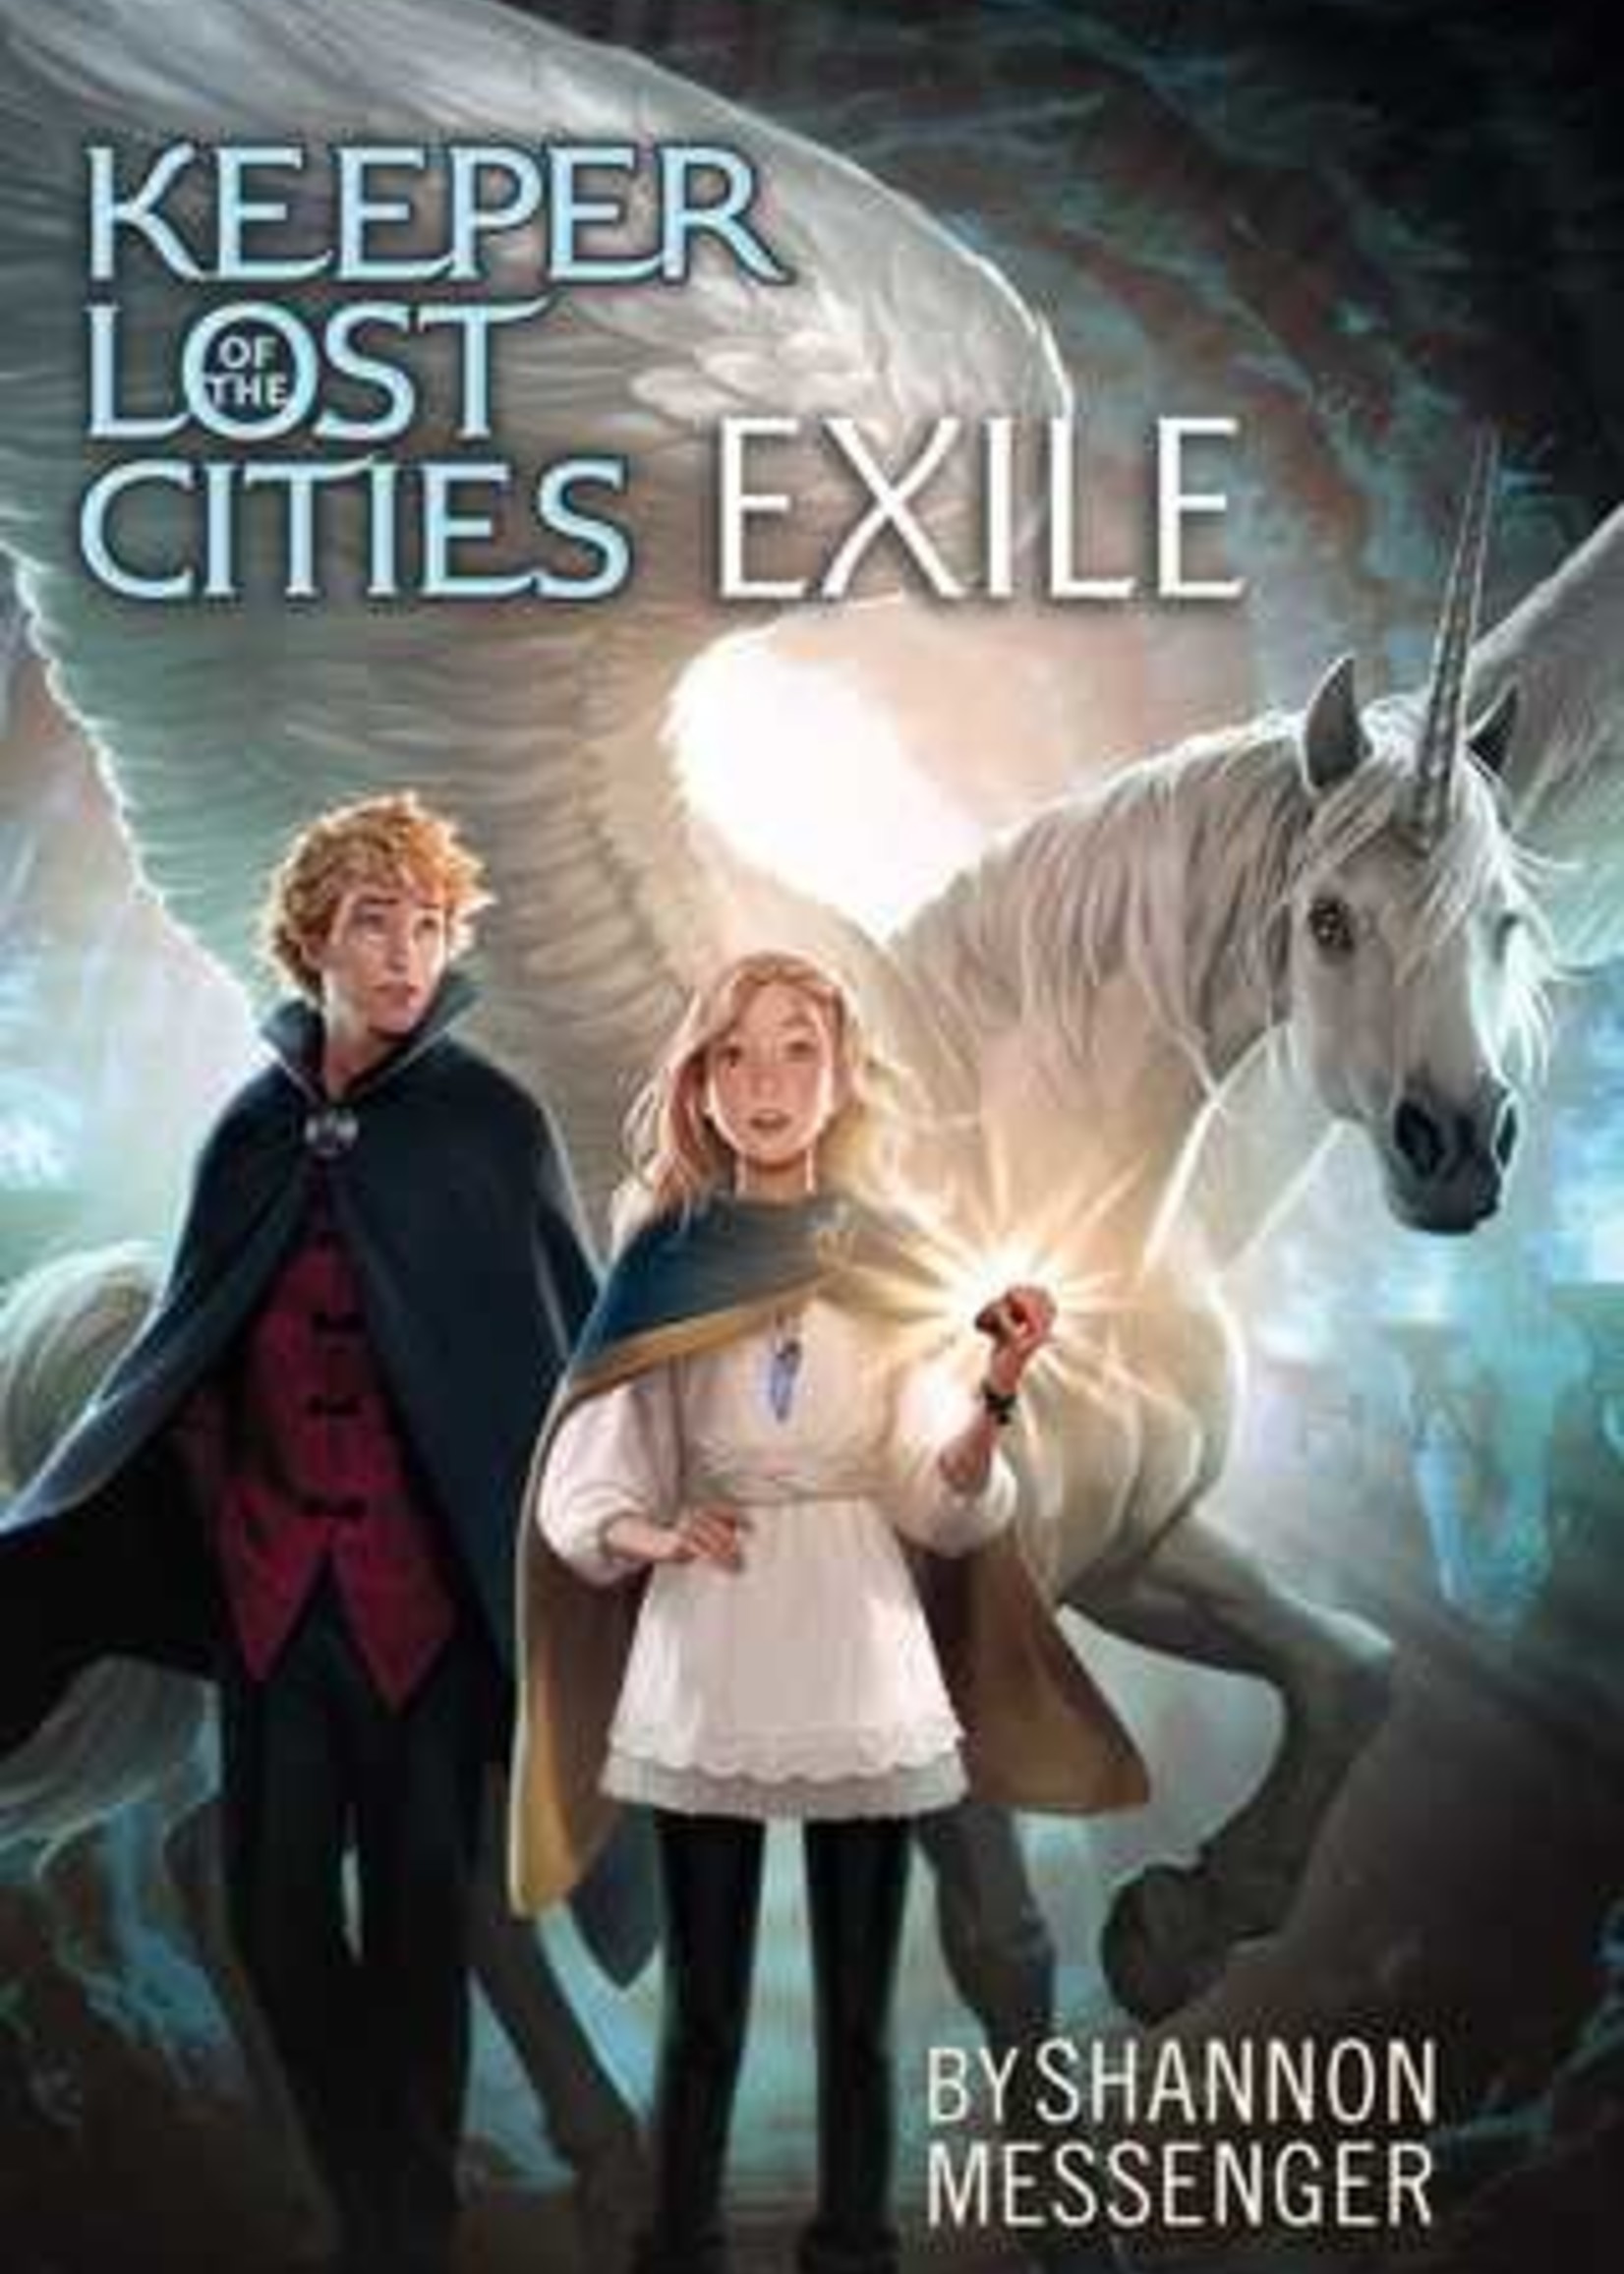 Exile (Keeper of the Lost Cities #2) by Shannon Messenger